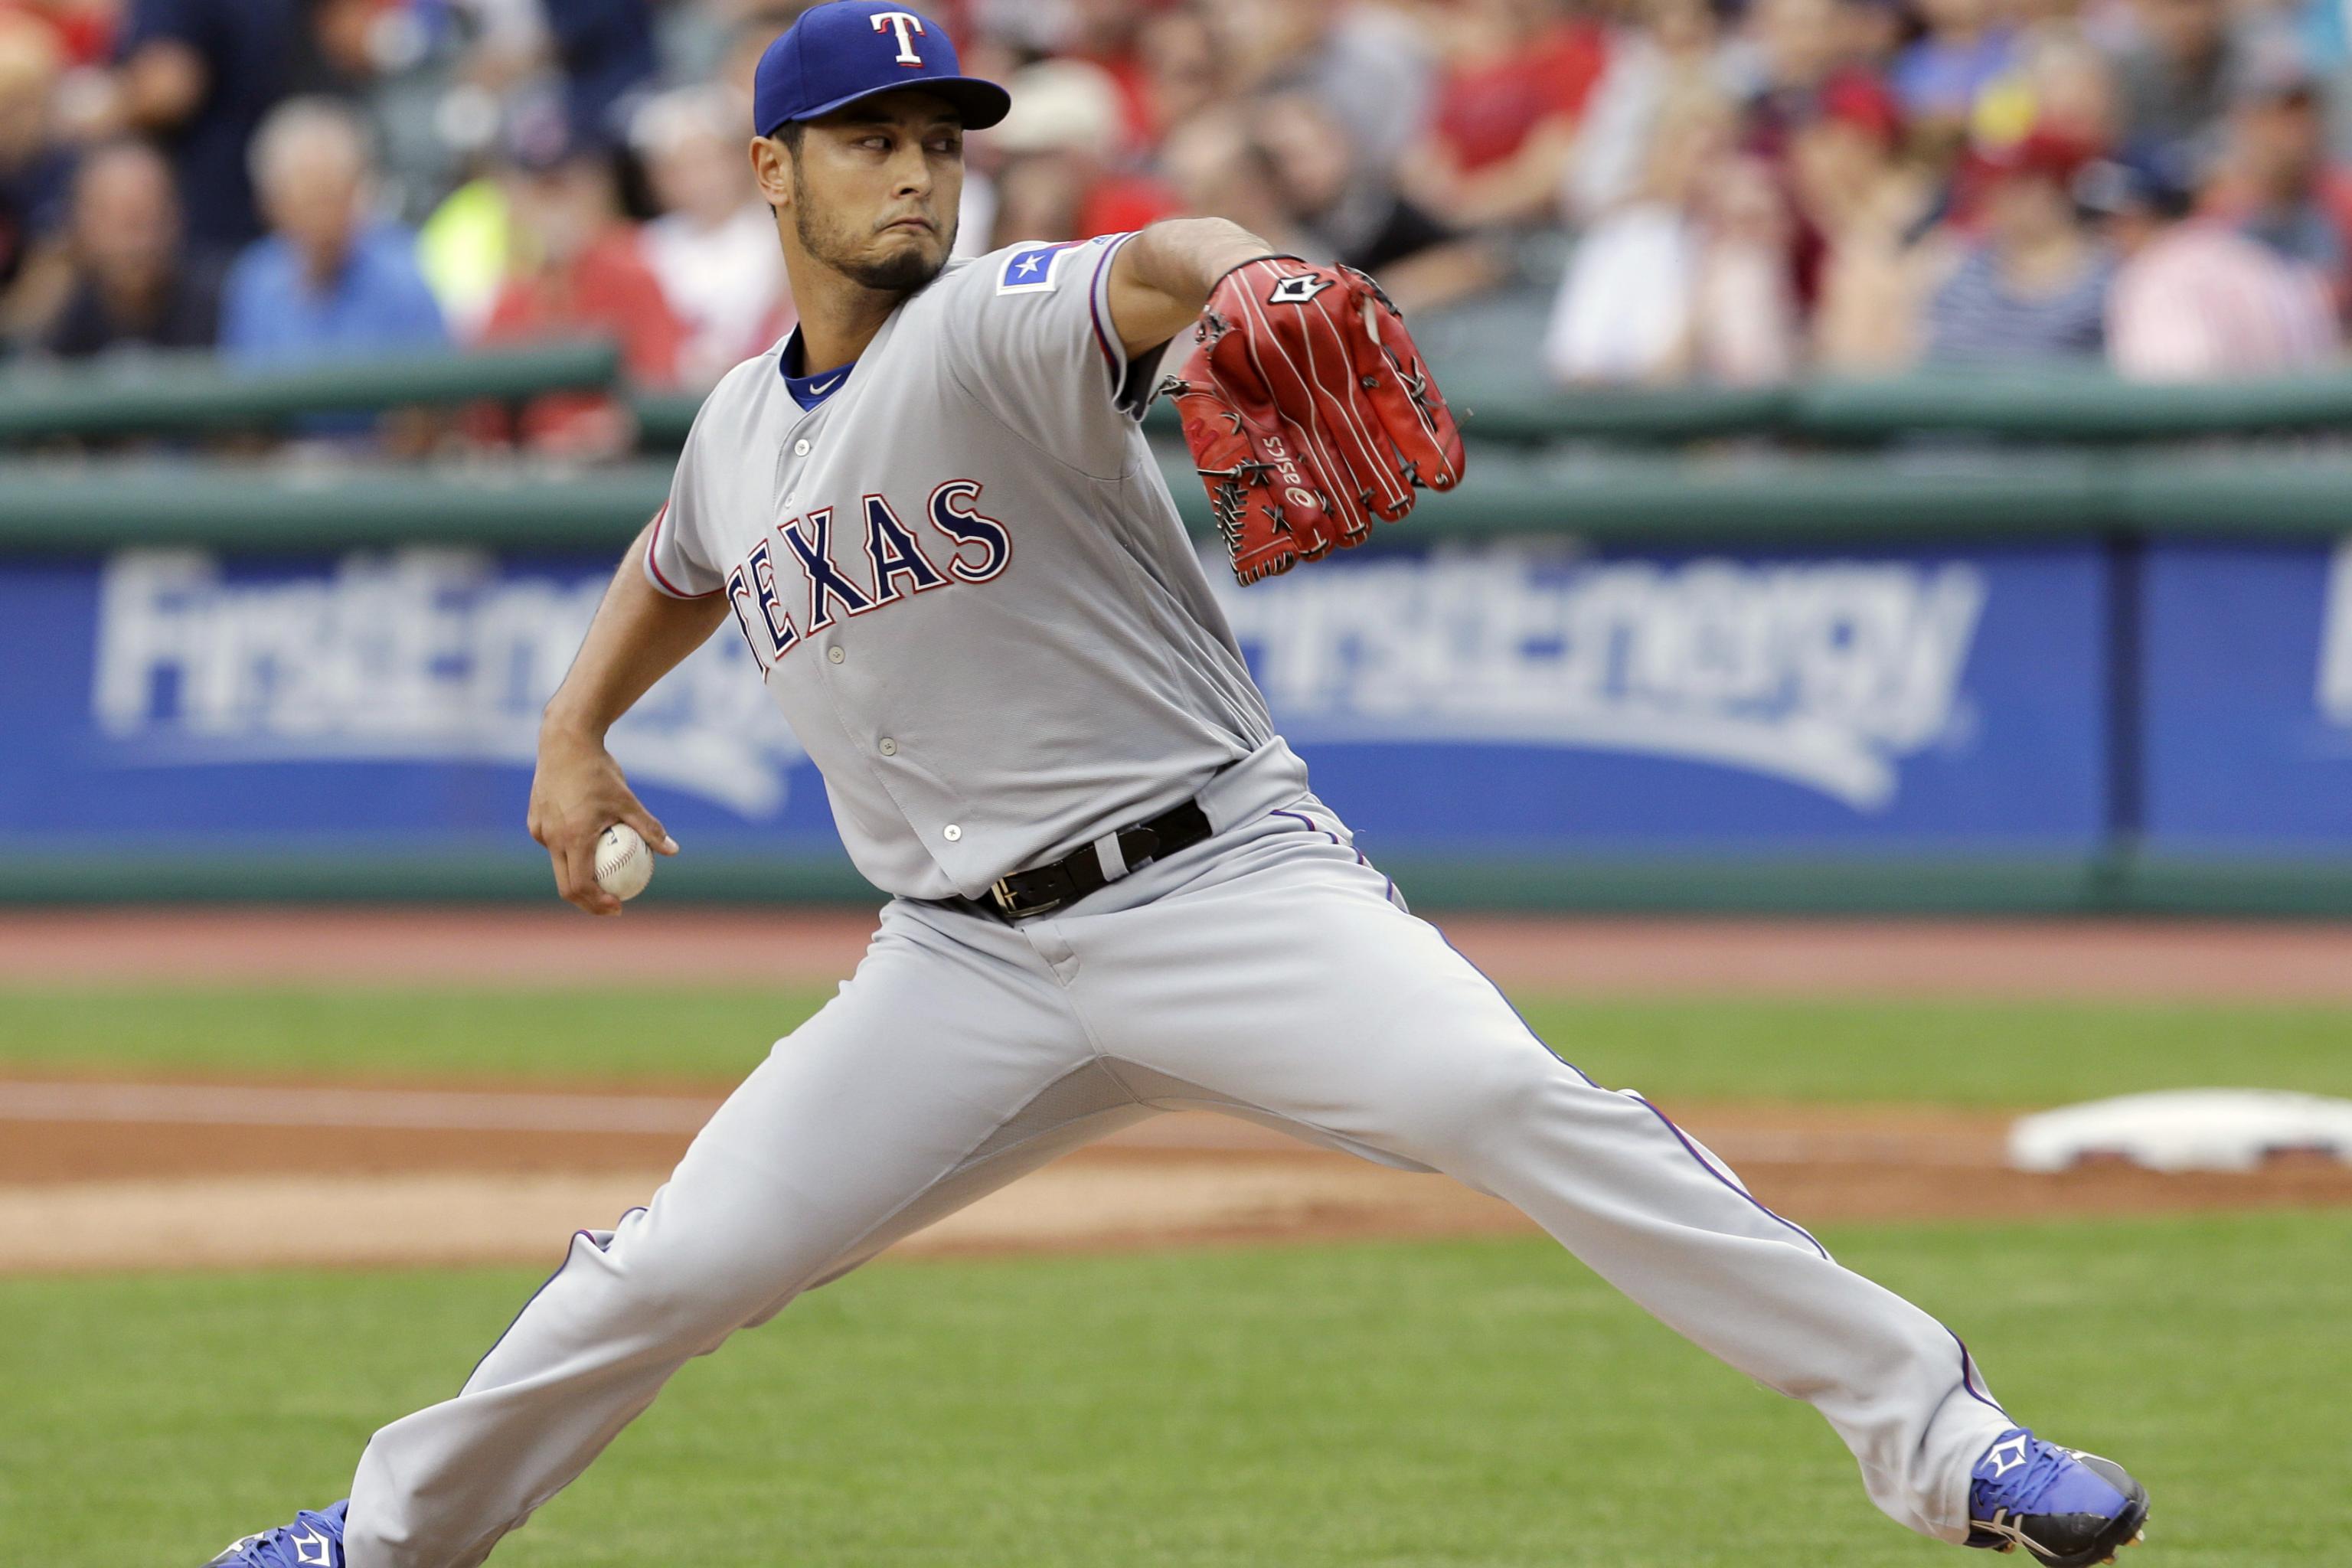 NPB NOTEBOOK] Now a Wily Veteran, Yu Darvish Aims to Play a Key Role at WBC